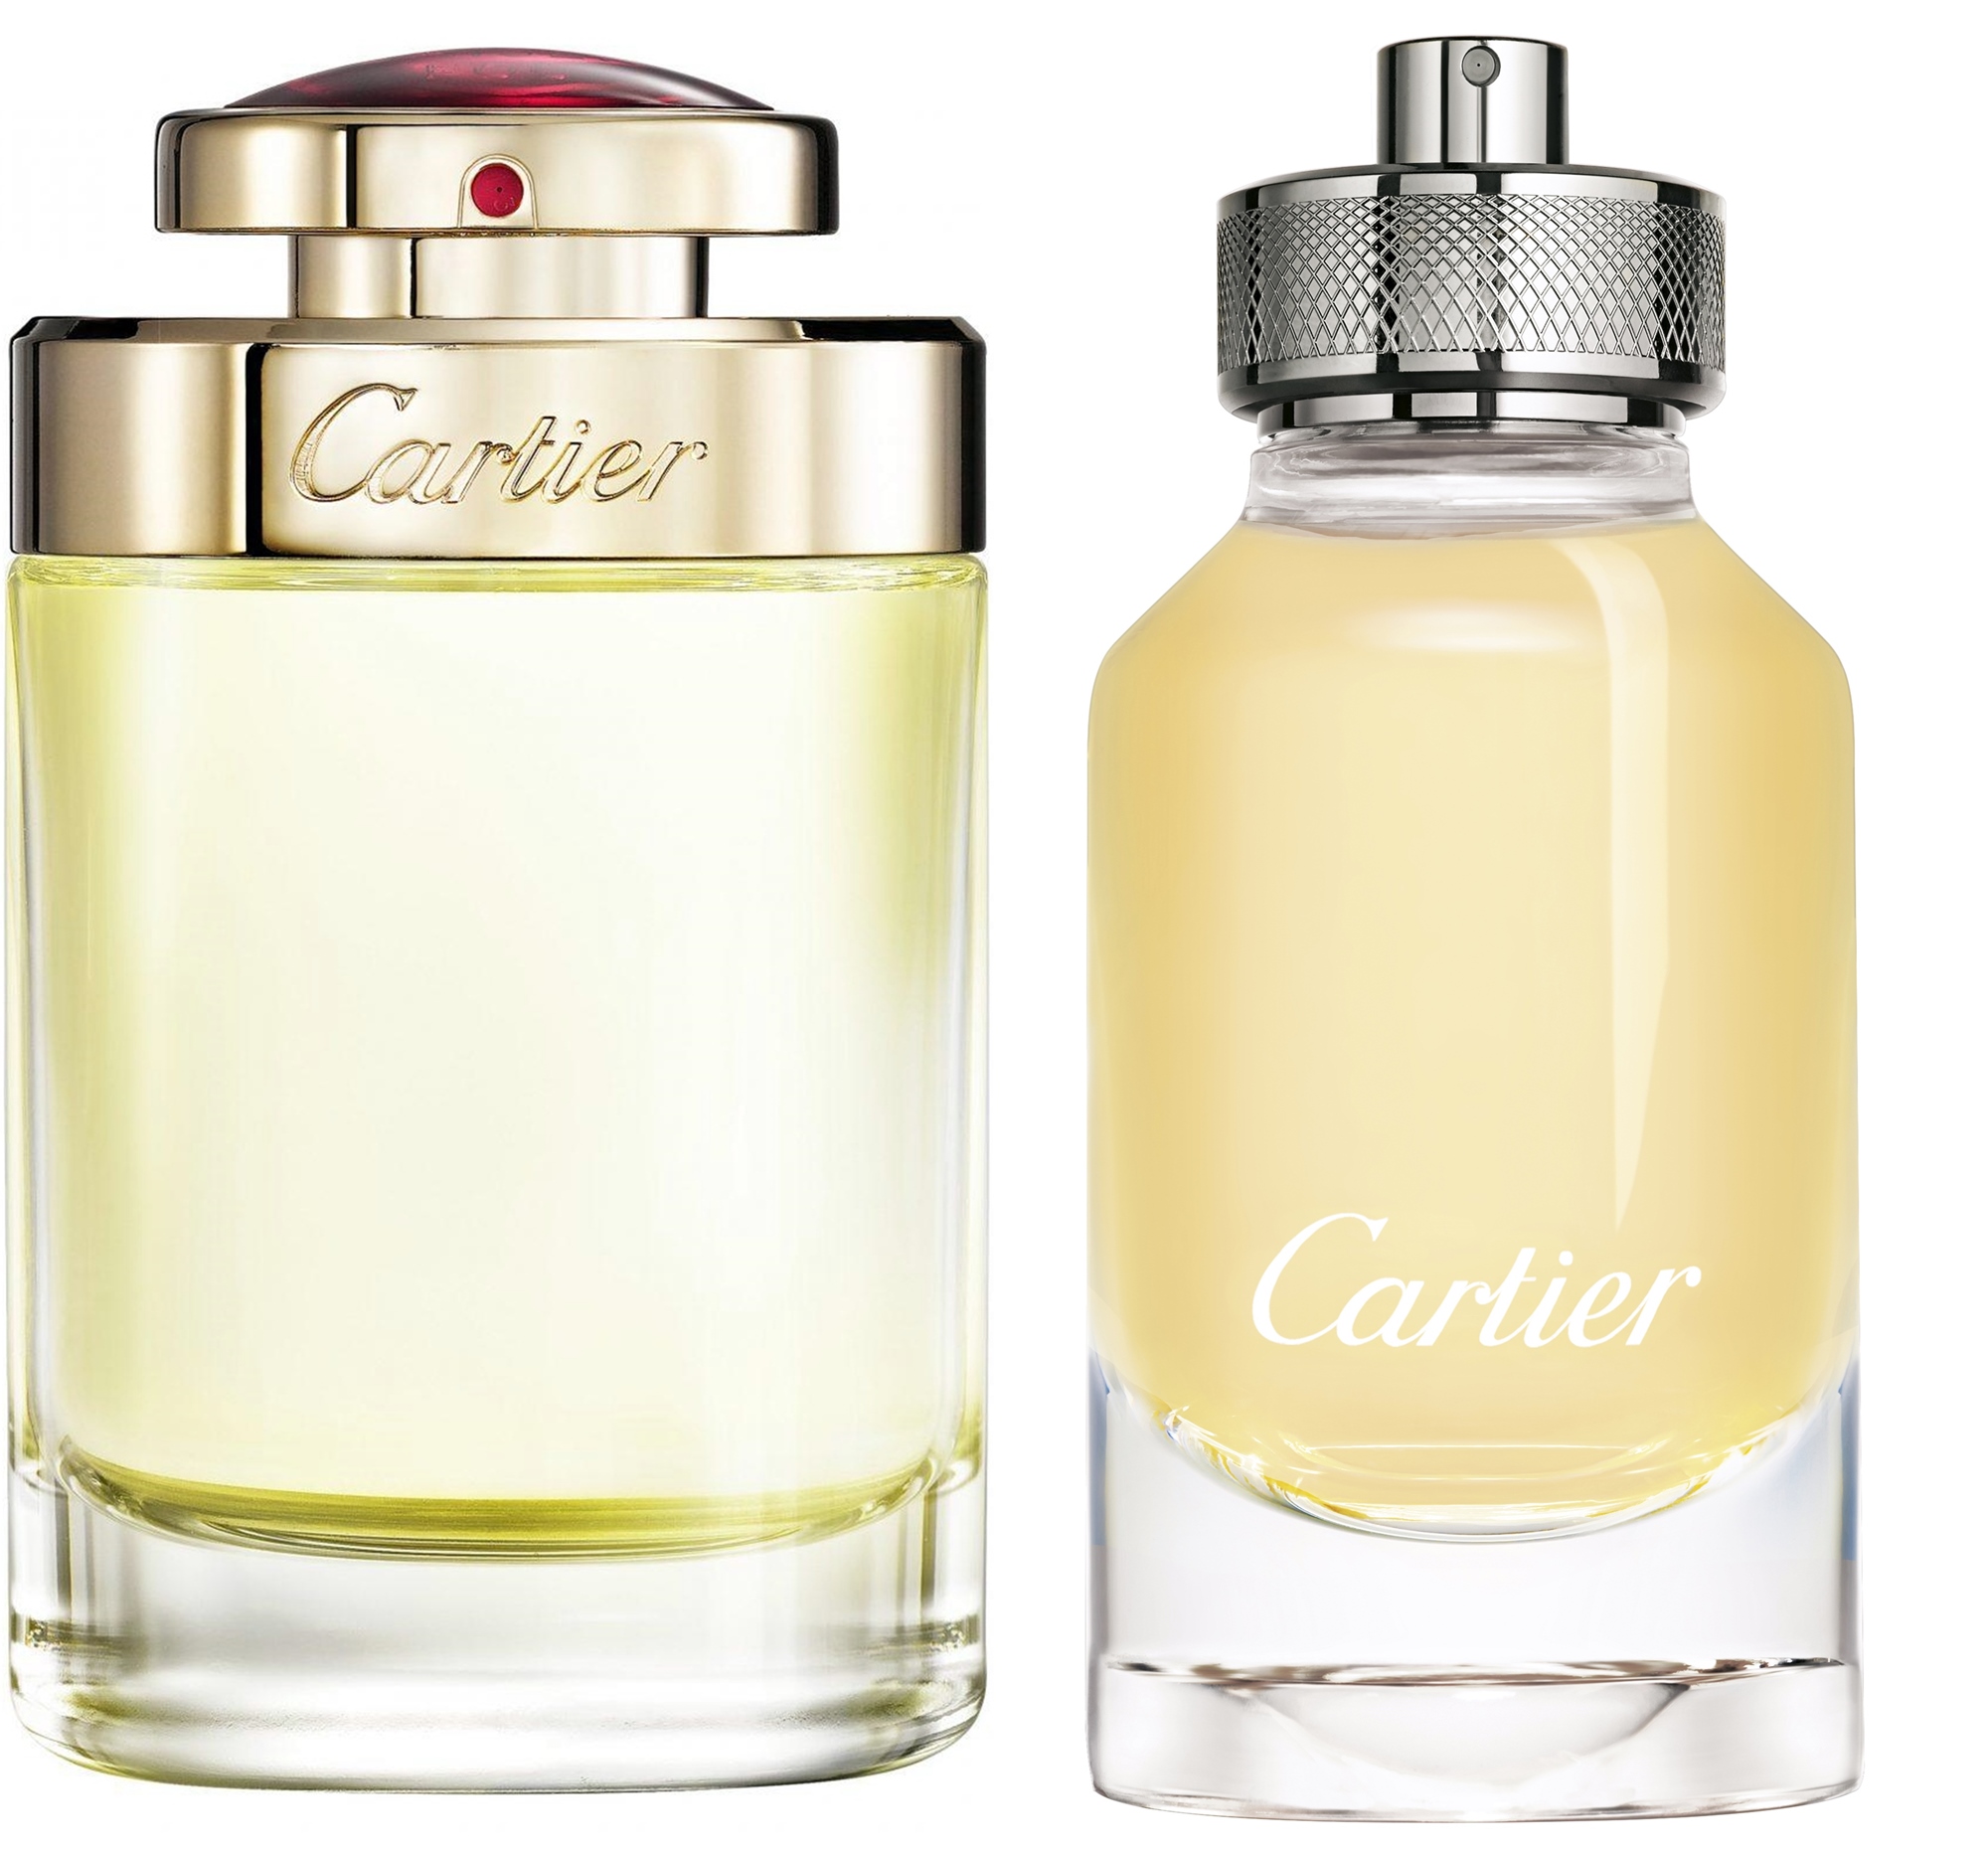 The Cartier Fragrances We're Loving for 